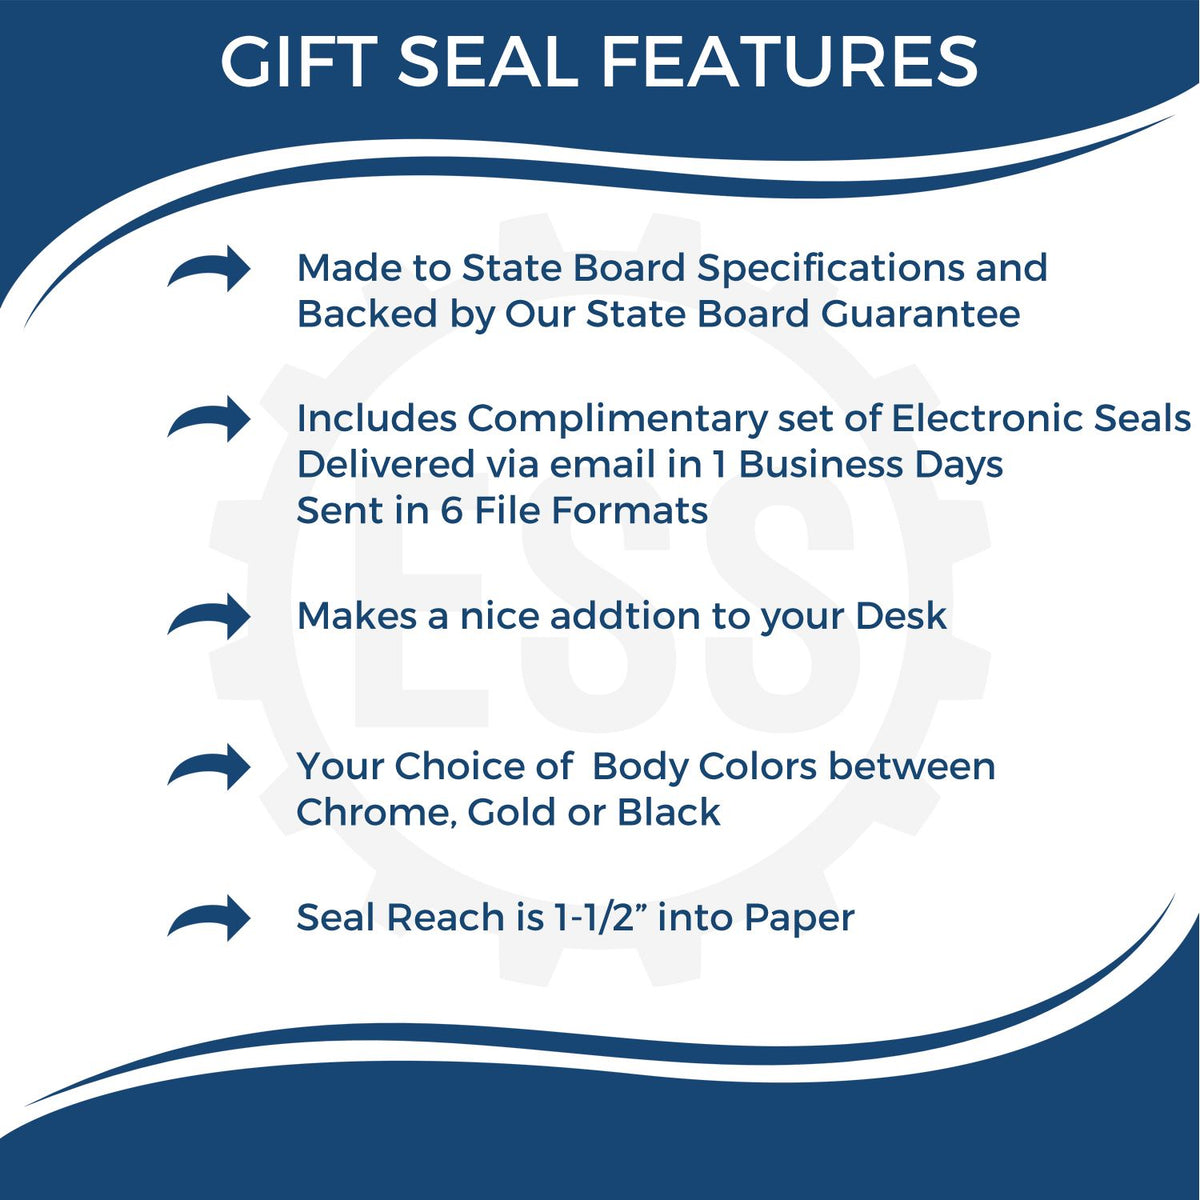 A picture of an infographic highlighting the selling points for the Gift Virginia Engineer Seal